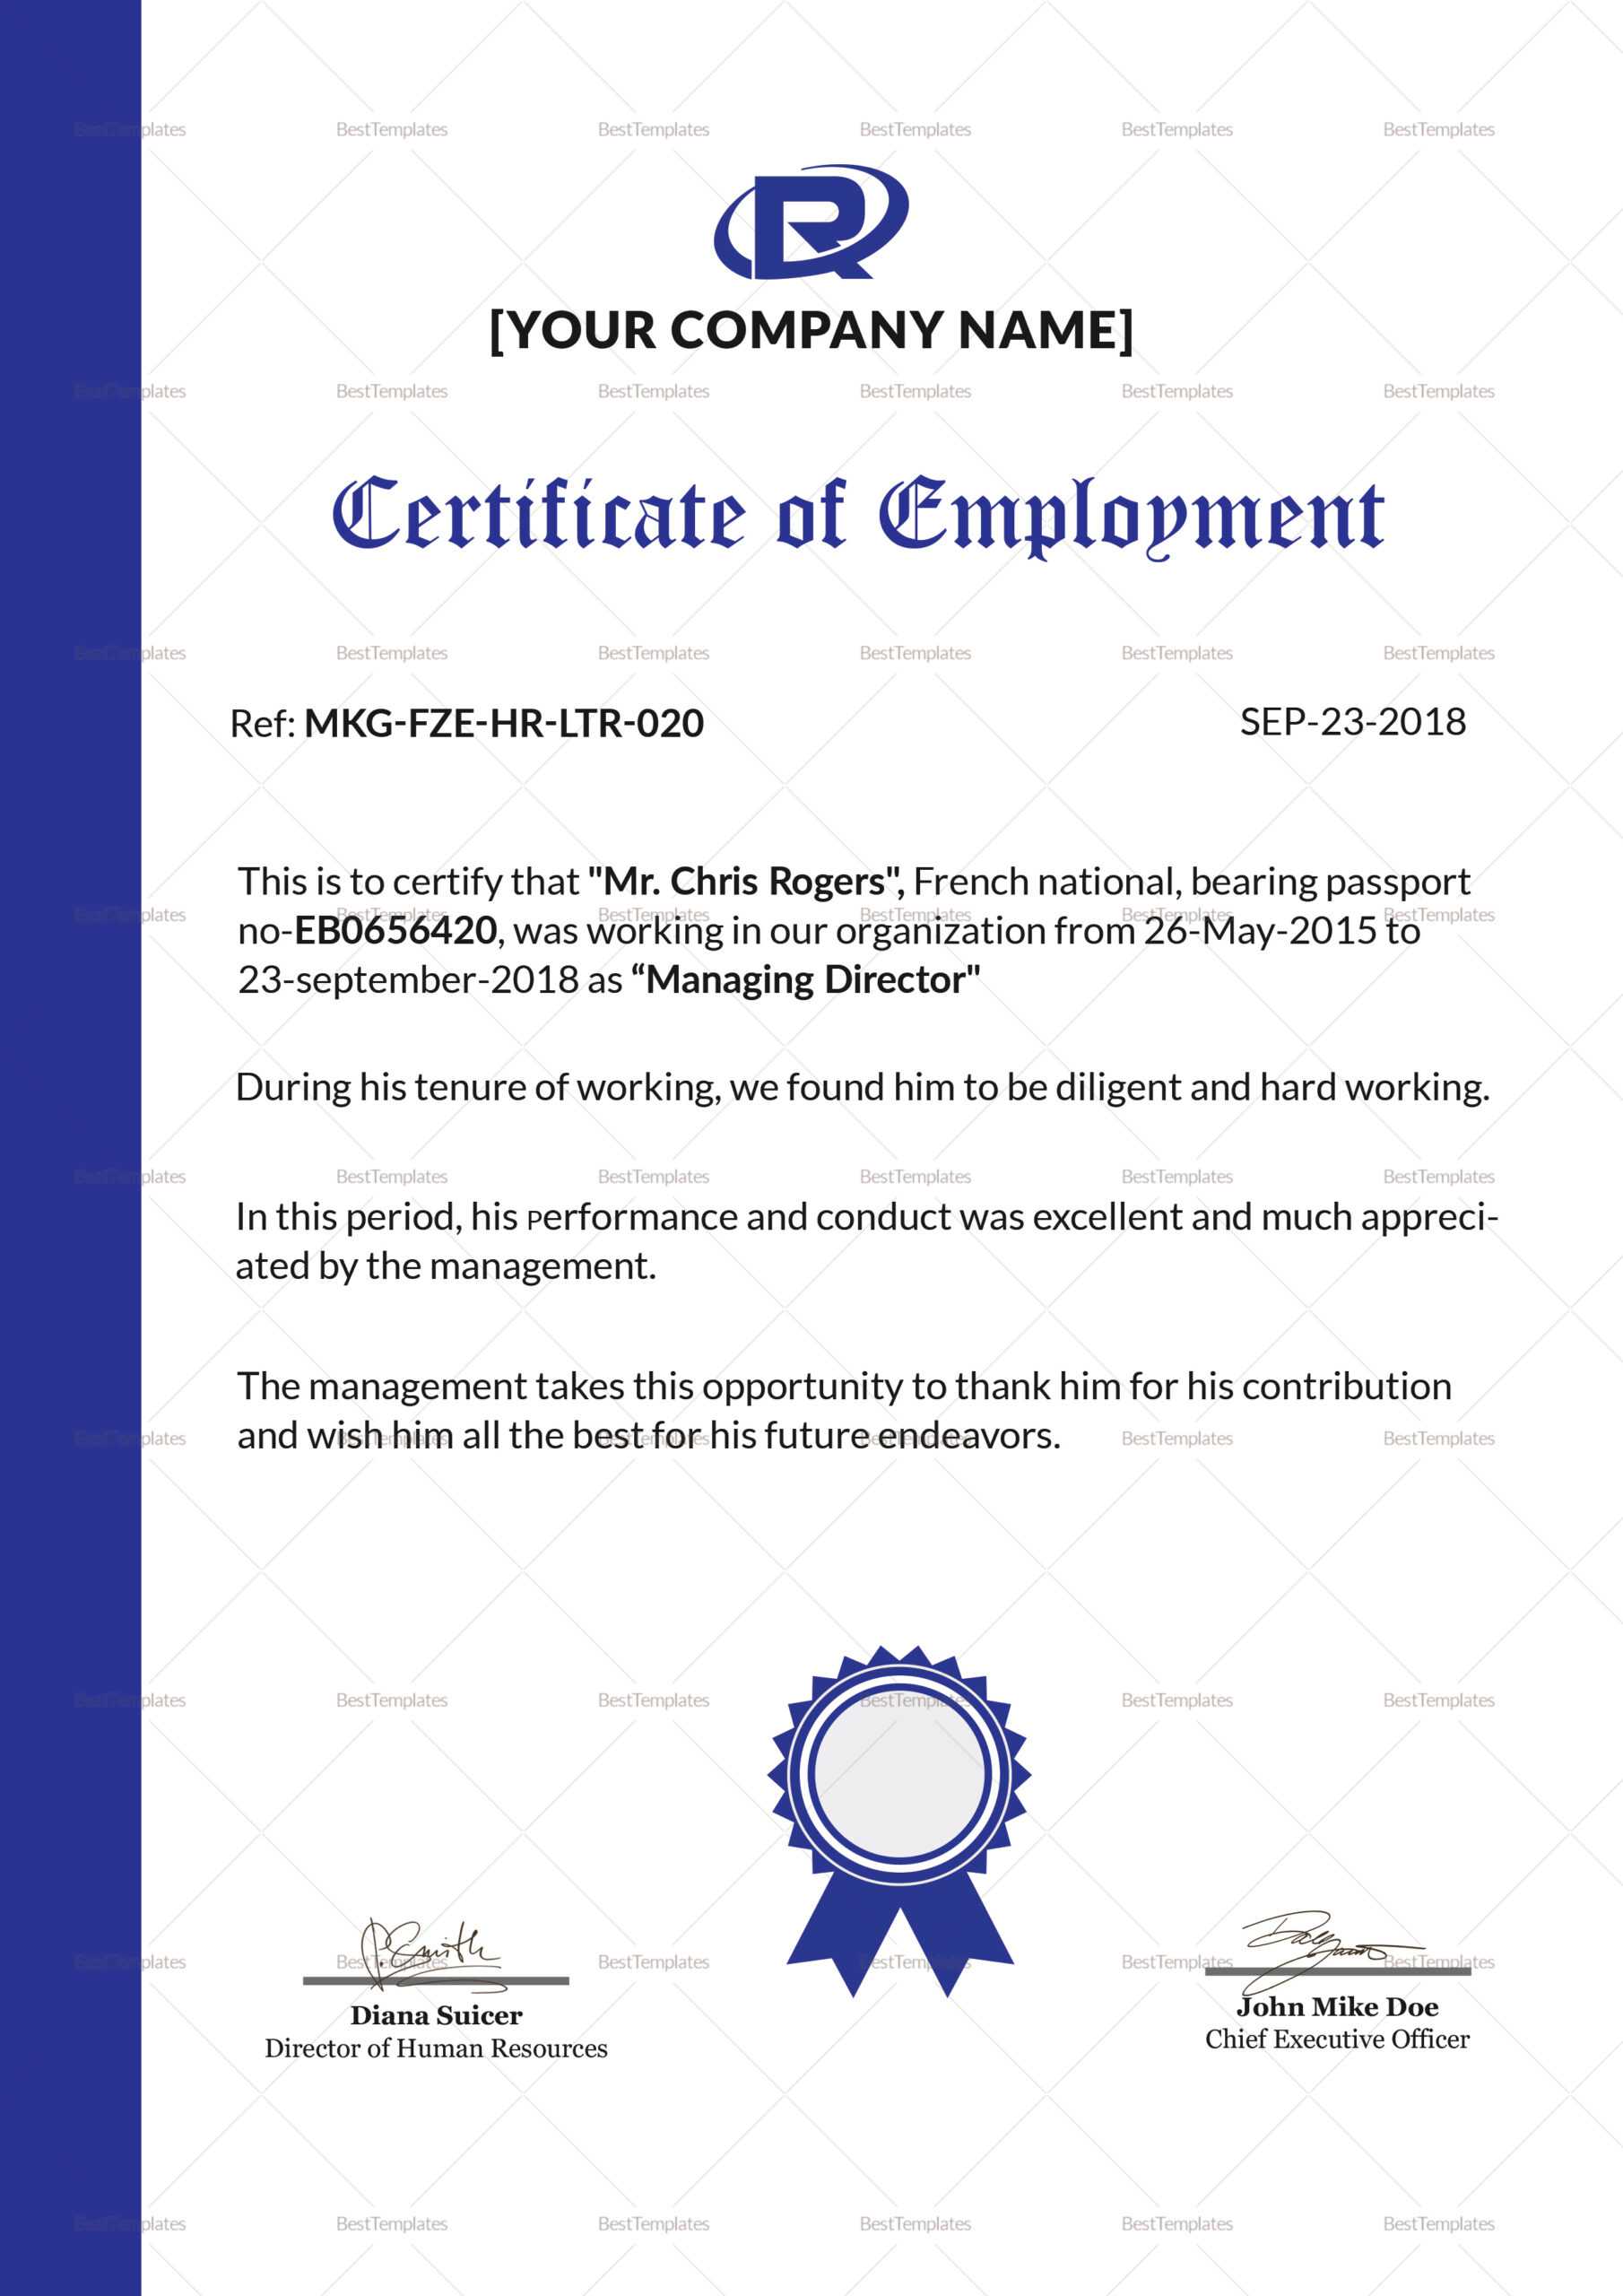 006 Certificate Of Employment Template Sample Impressive Regarding Template Of Certificate Of Employment